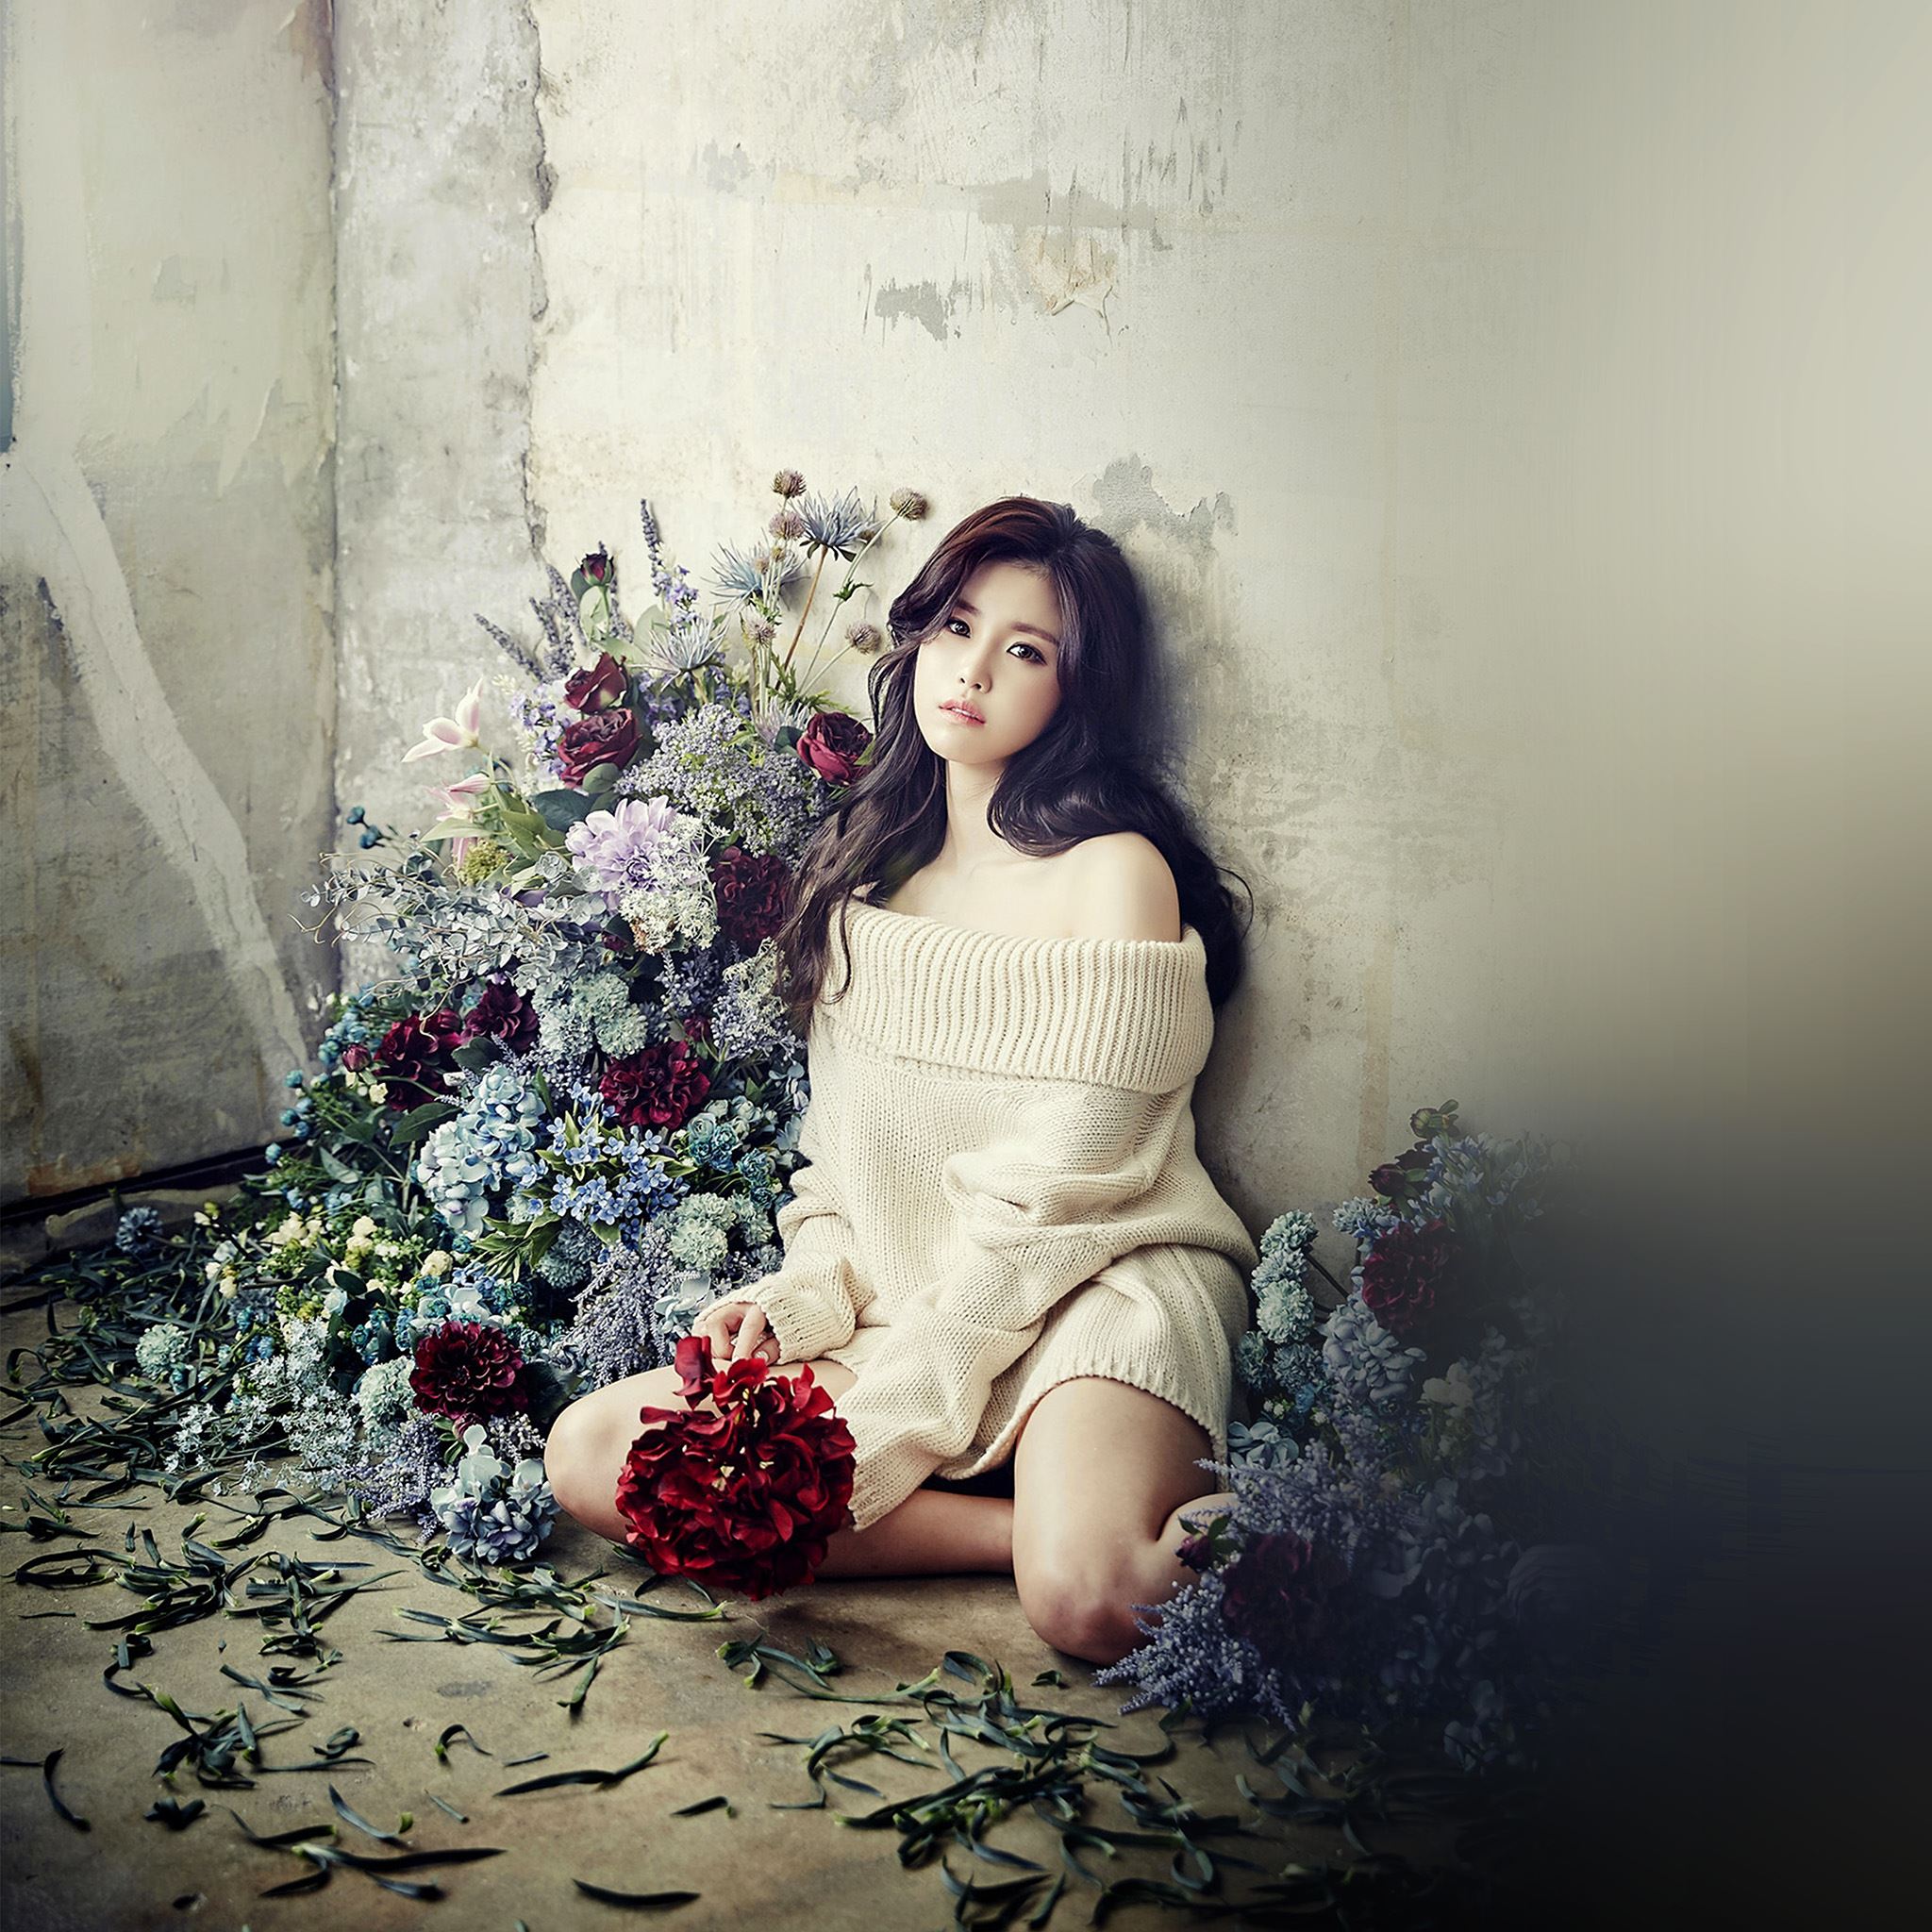 Flower Girl Hyosung Girl Kpop Celebrity iPad Air Wallpapers Free Download